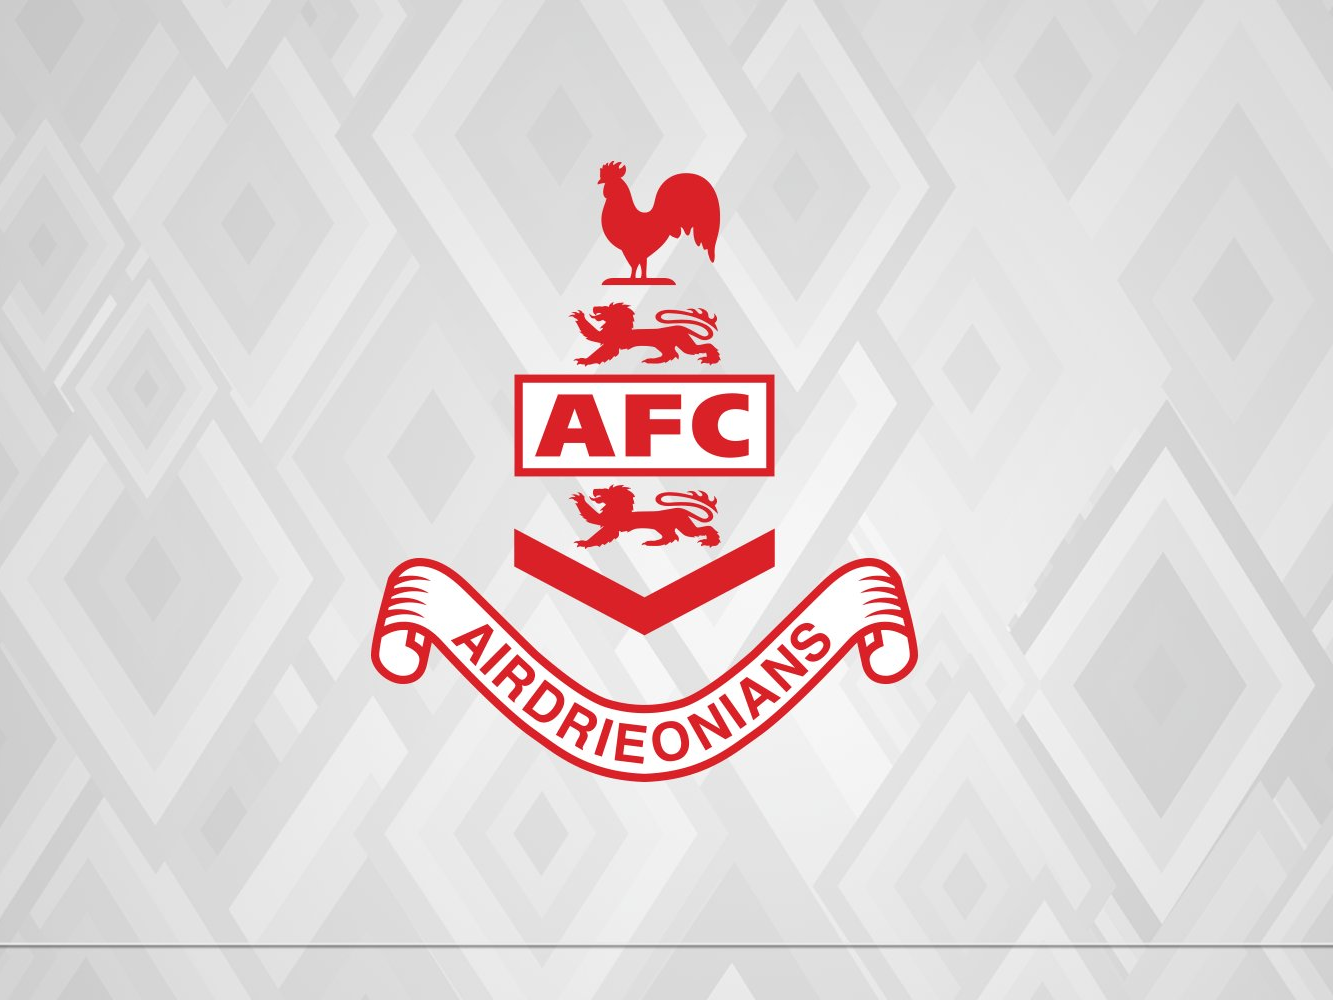 Airdrieonians F.C